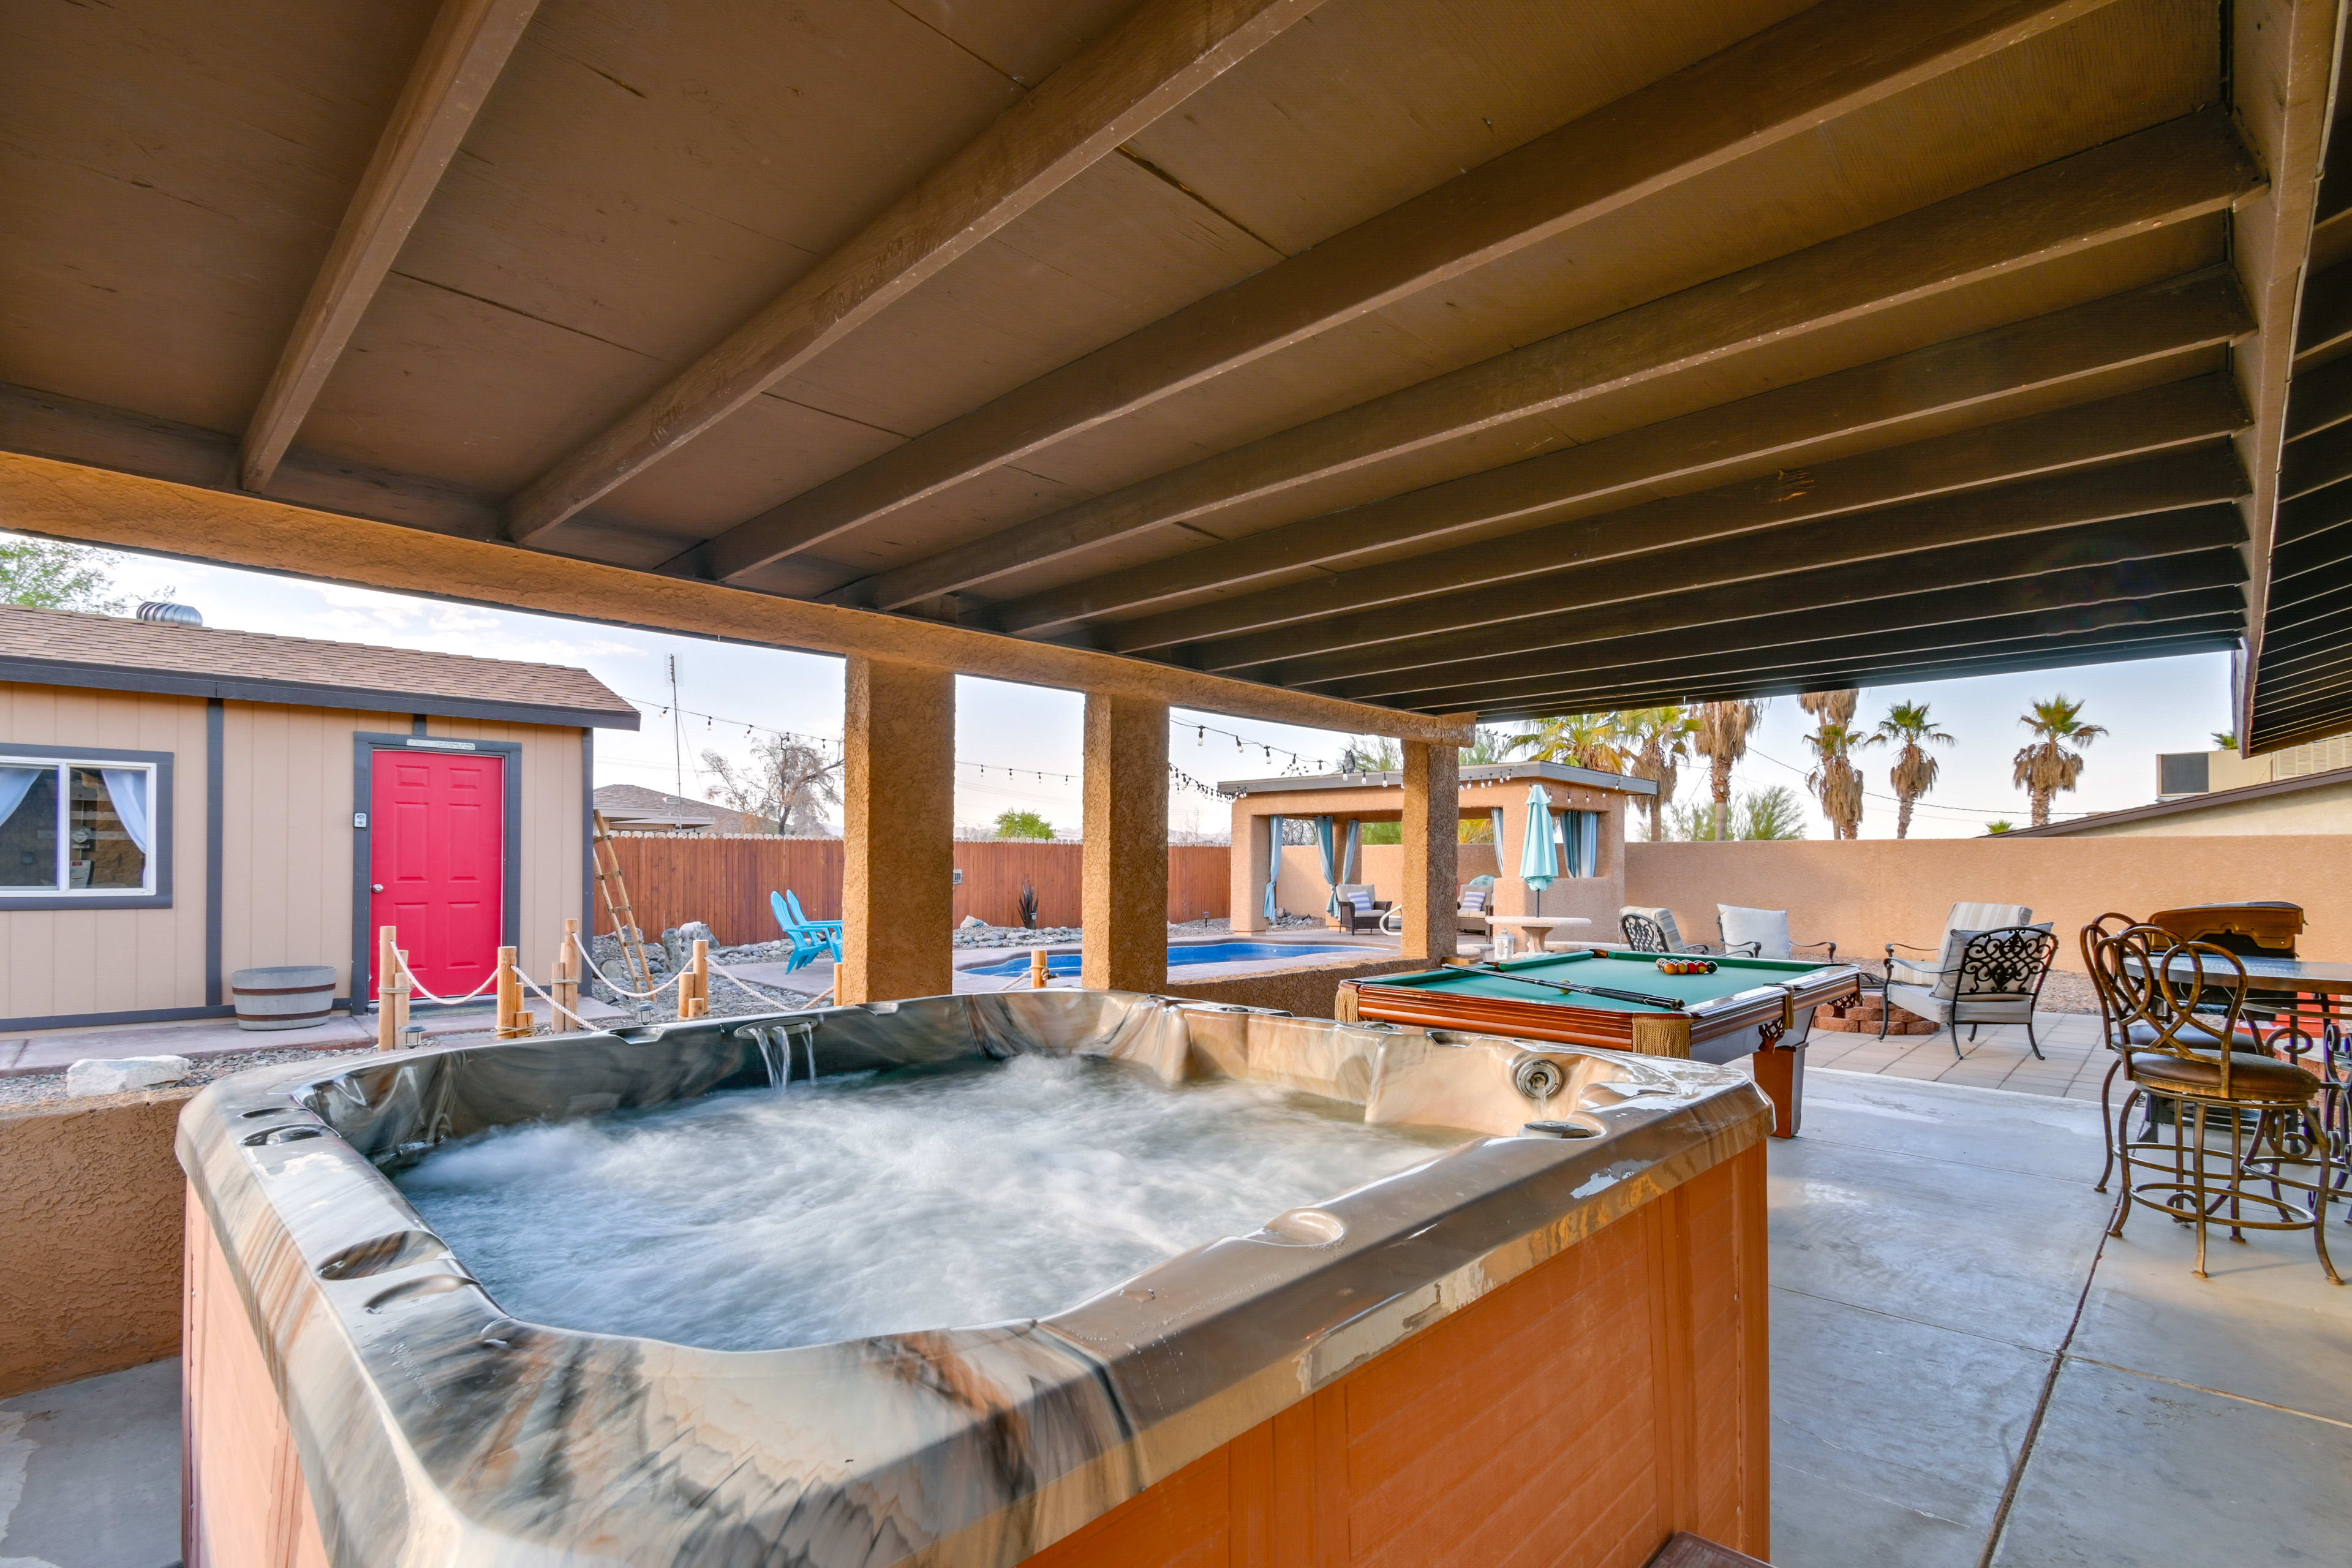 Patio | Hot Tub | Gas Grill (Propane Provided)